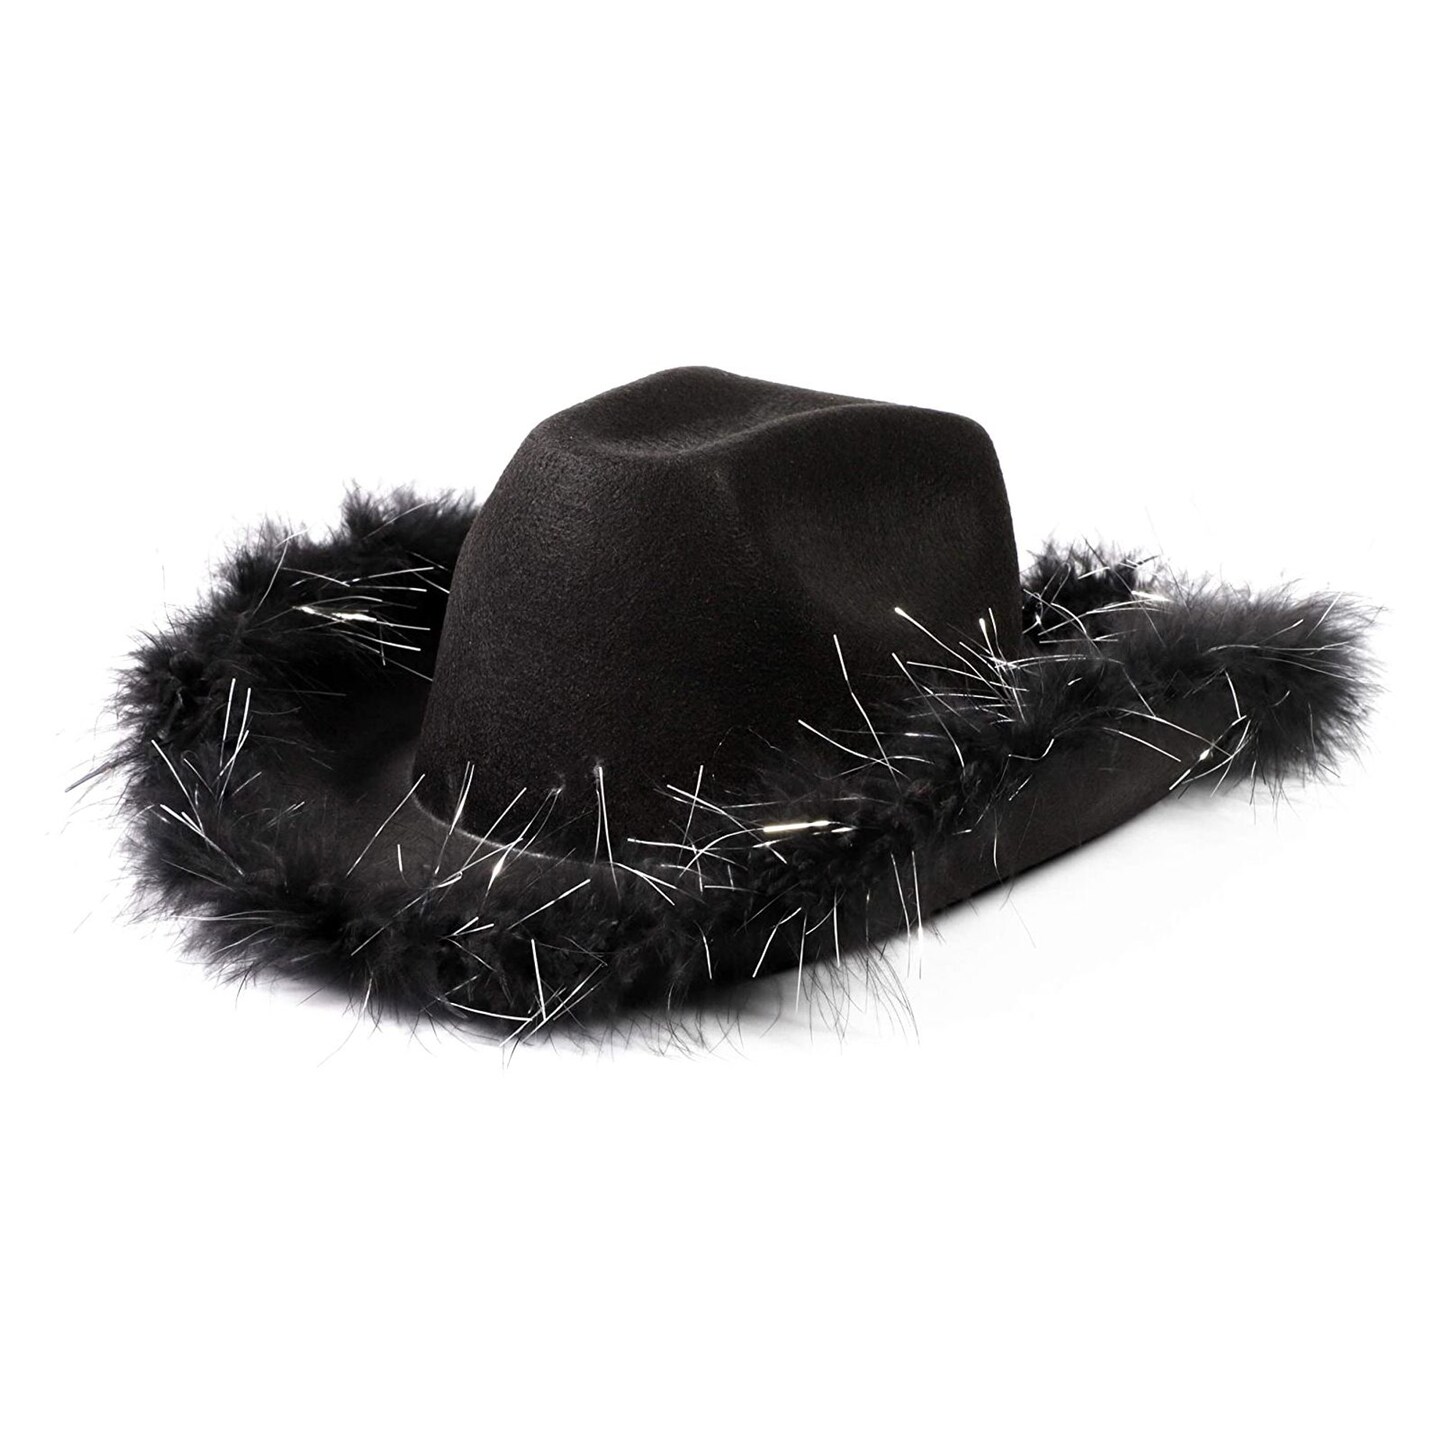 Cowboy Hats for Women and Men - Fluffy, Sparkly Black Cowgirl Hat with  Feathers for Costume, Dress Up Birthday, Bachelorette Party Accessories  (Western Style)